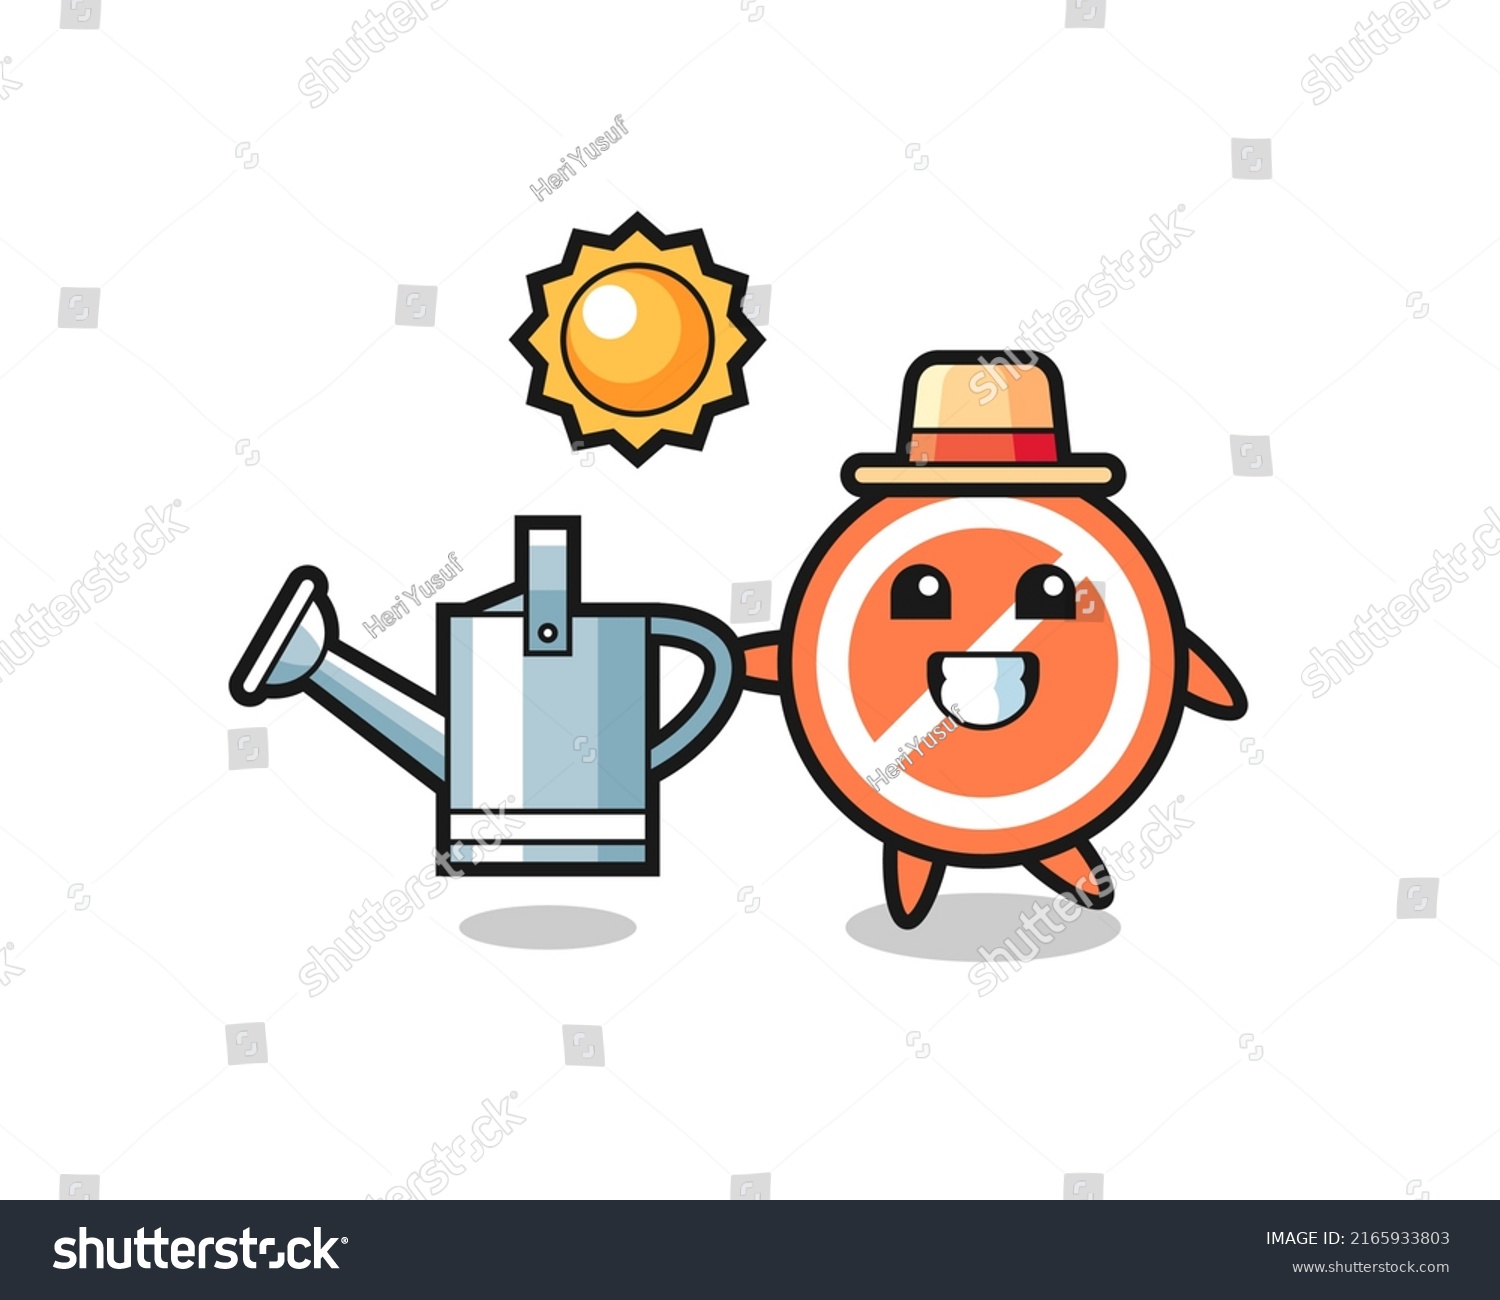 SVG of Cartoon character of stop sign holding watering can , cute style design for t shirt, sticker, logo element svg